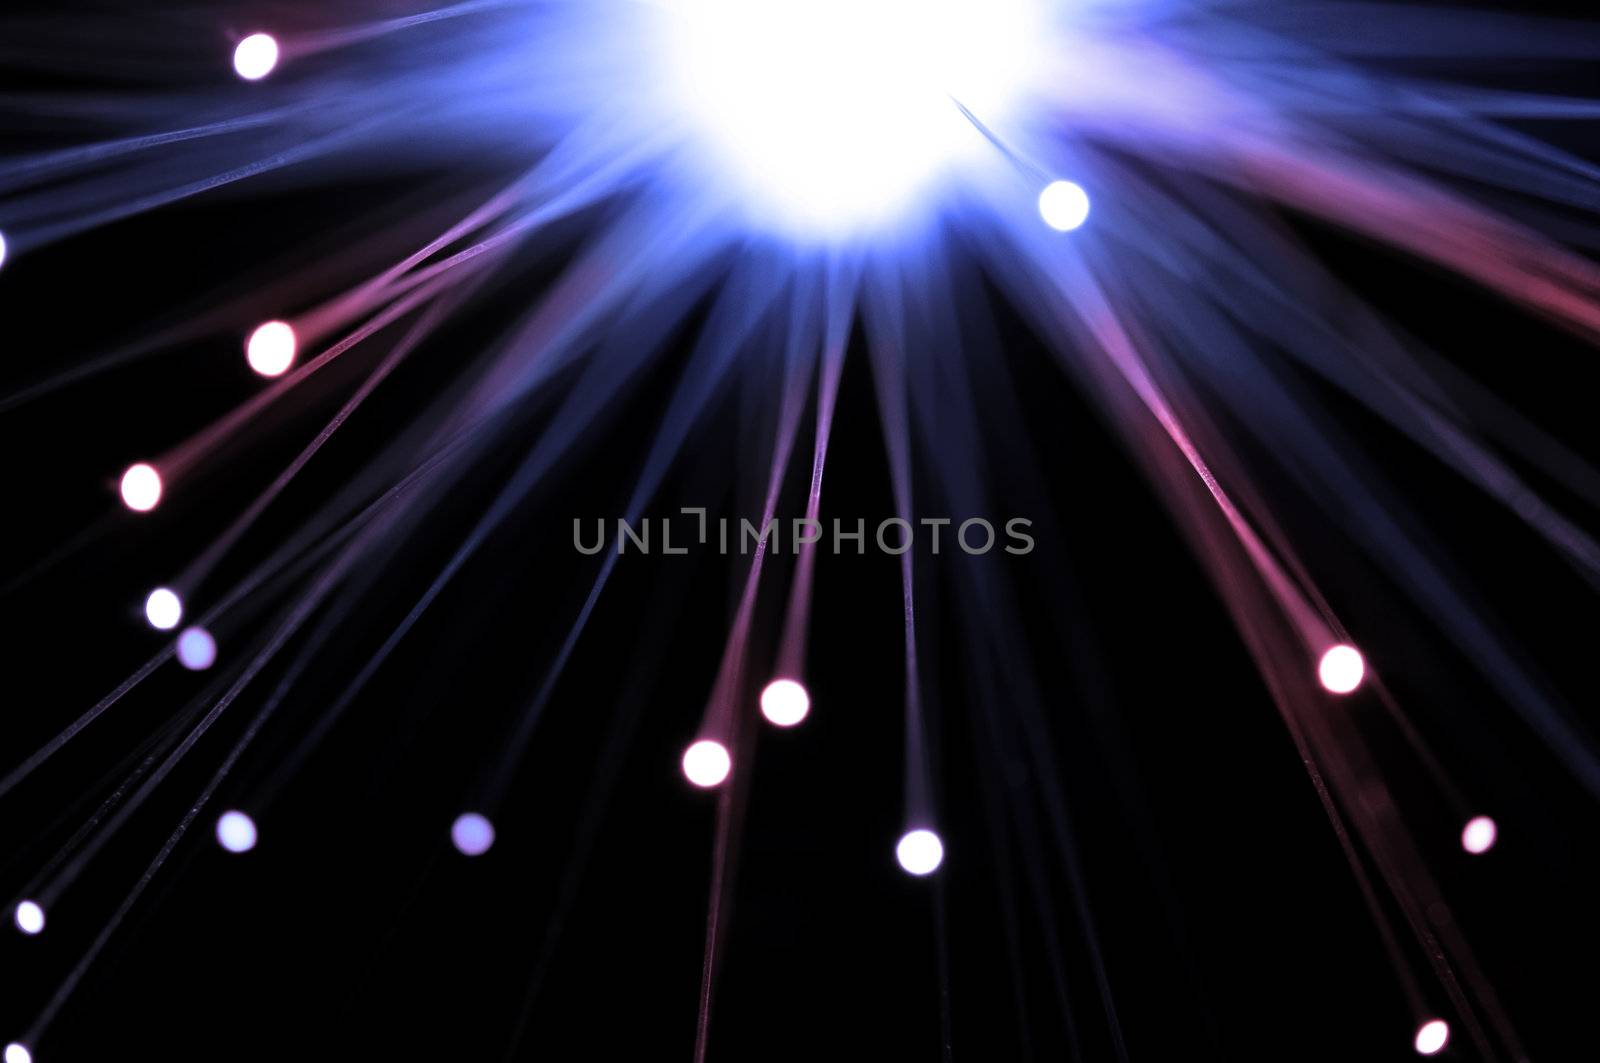 Close up and abstract style capturing the ends of many illuminated fibre optic light strands emitted from a central white light against dark background.